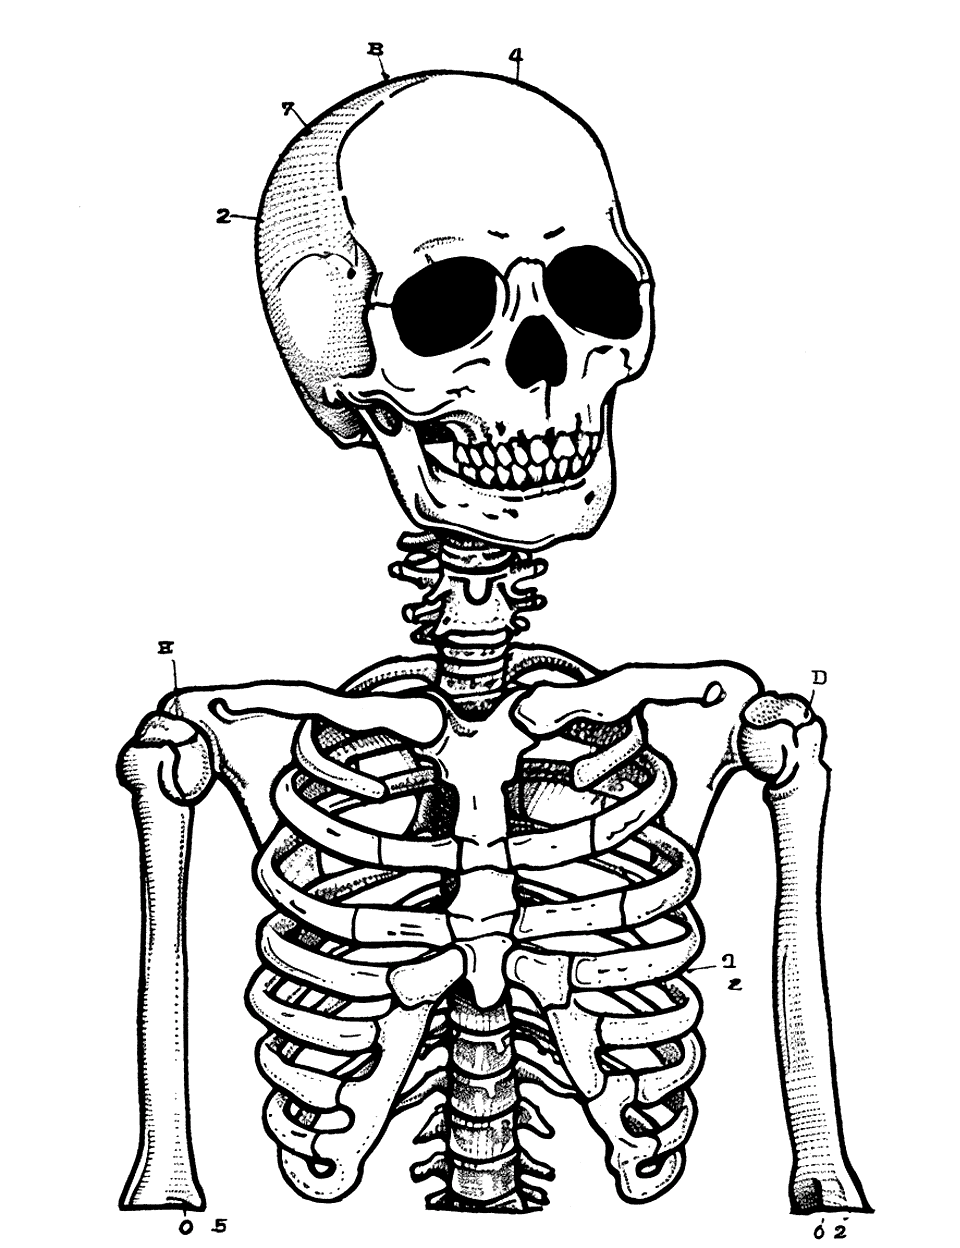 Skeleton Anatomy Lesson Coloring Page - A human skeleton with labeled bones for an educational anatomy lesson.